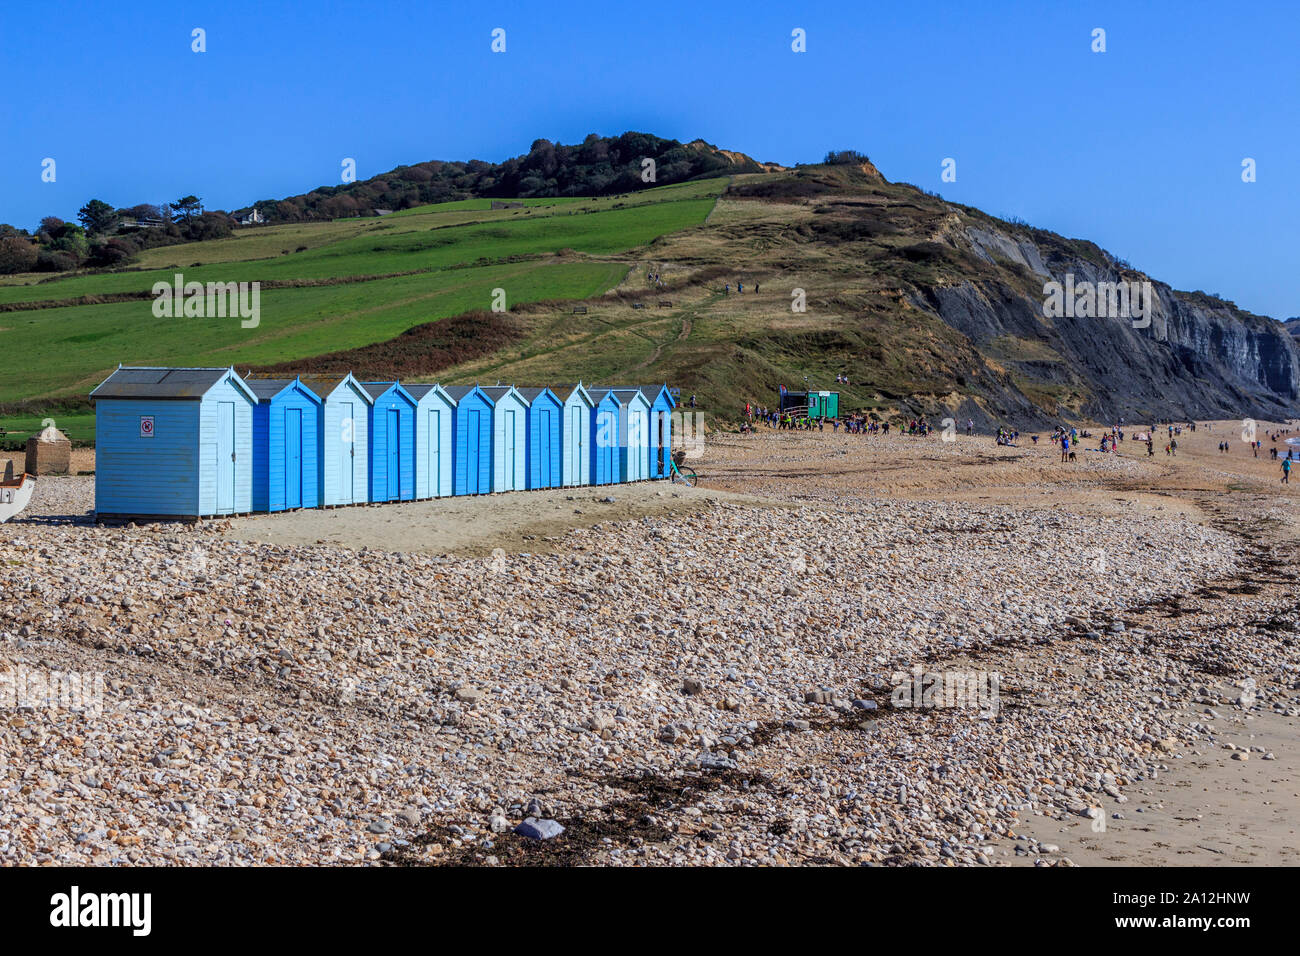 charmouth seaside resort, crumbling cliff strata, fossil hunting beaches, south coast, long distance footpath,dorset, england, uk, gb Stock Photo